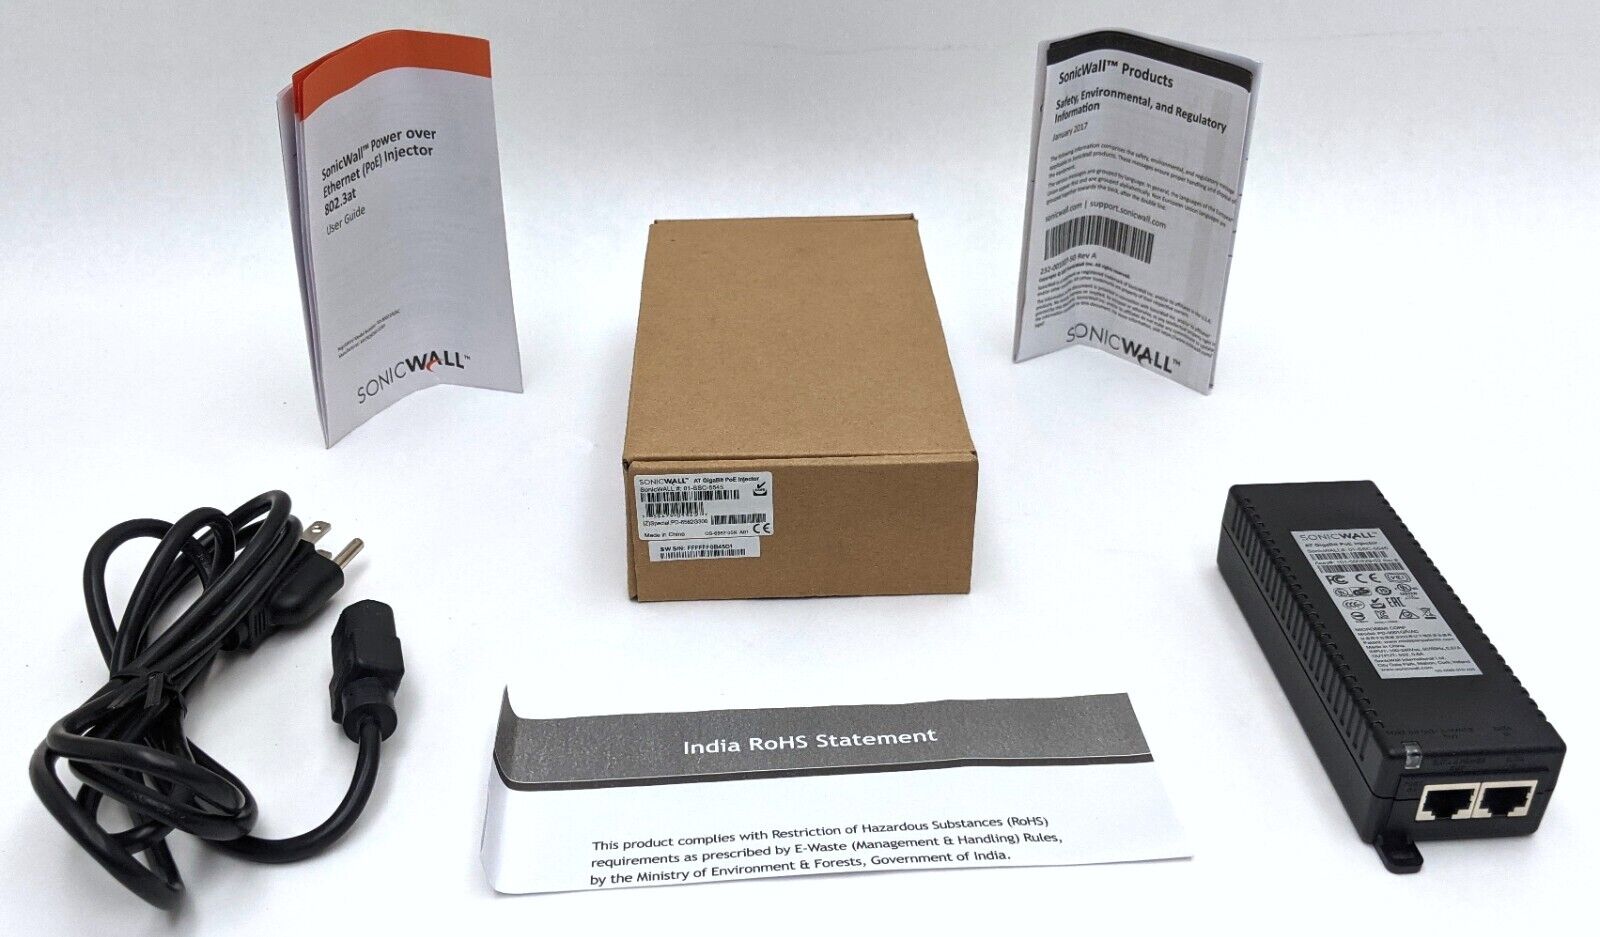 SonicWALL 01-SSC-5545 802.3 AT Gigabit PoE Injector Black w/ AC Power Cord - NOB